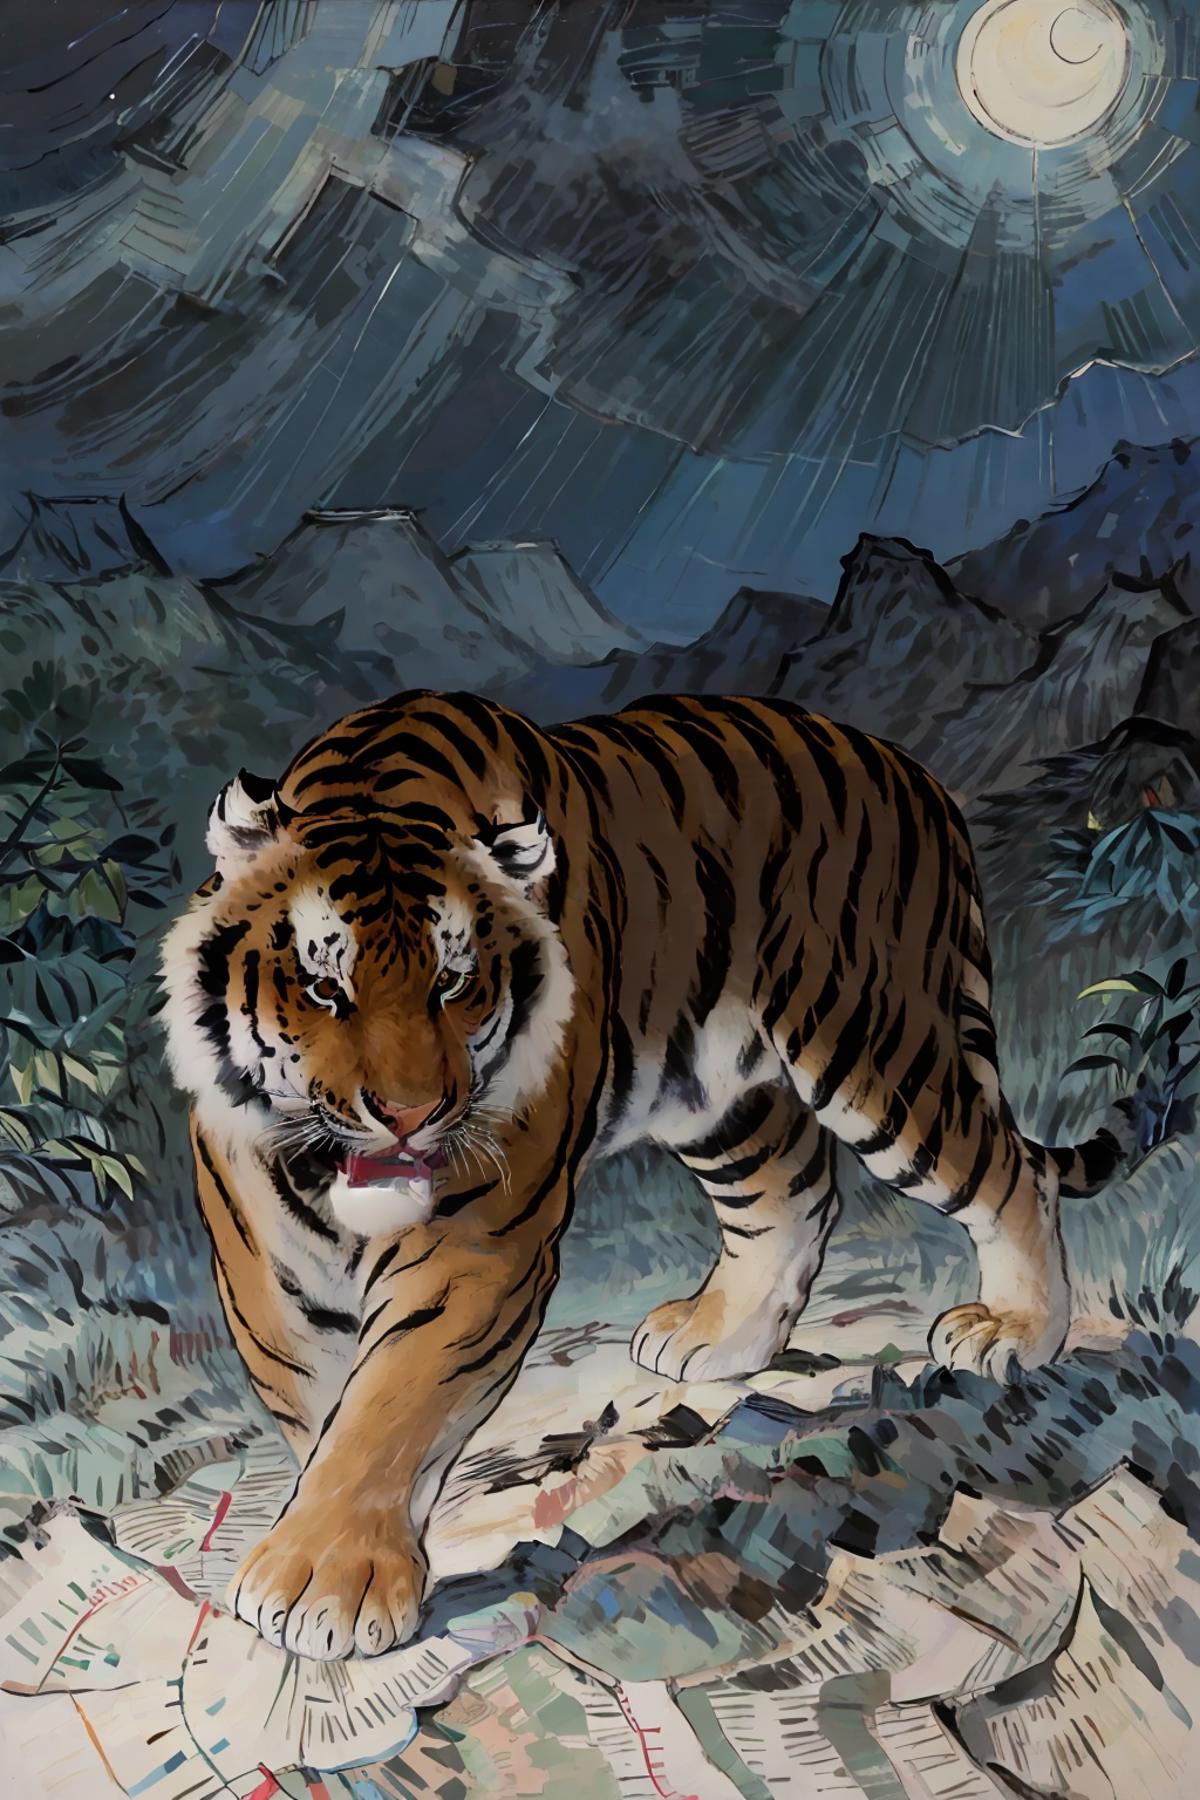 A large tiger walking on a rocky path in a jungle.